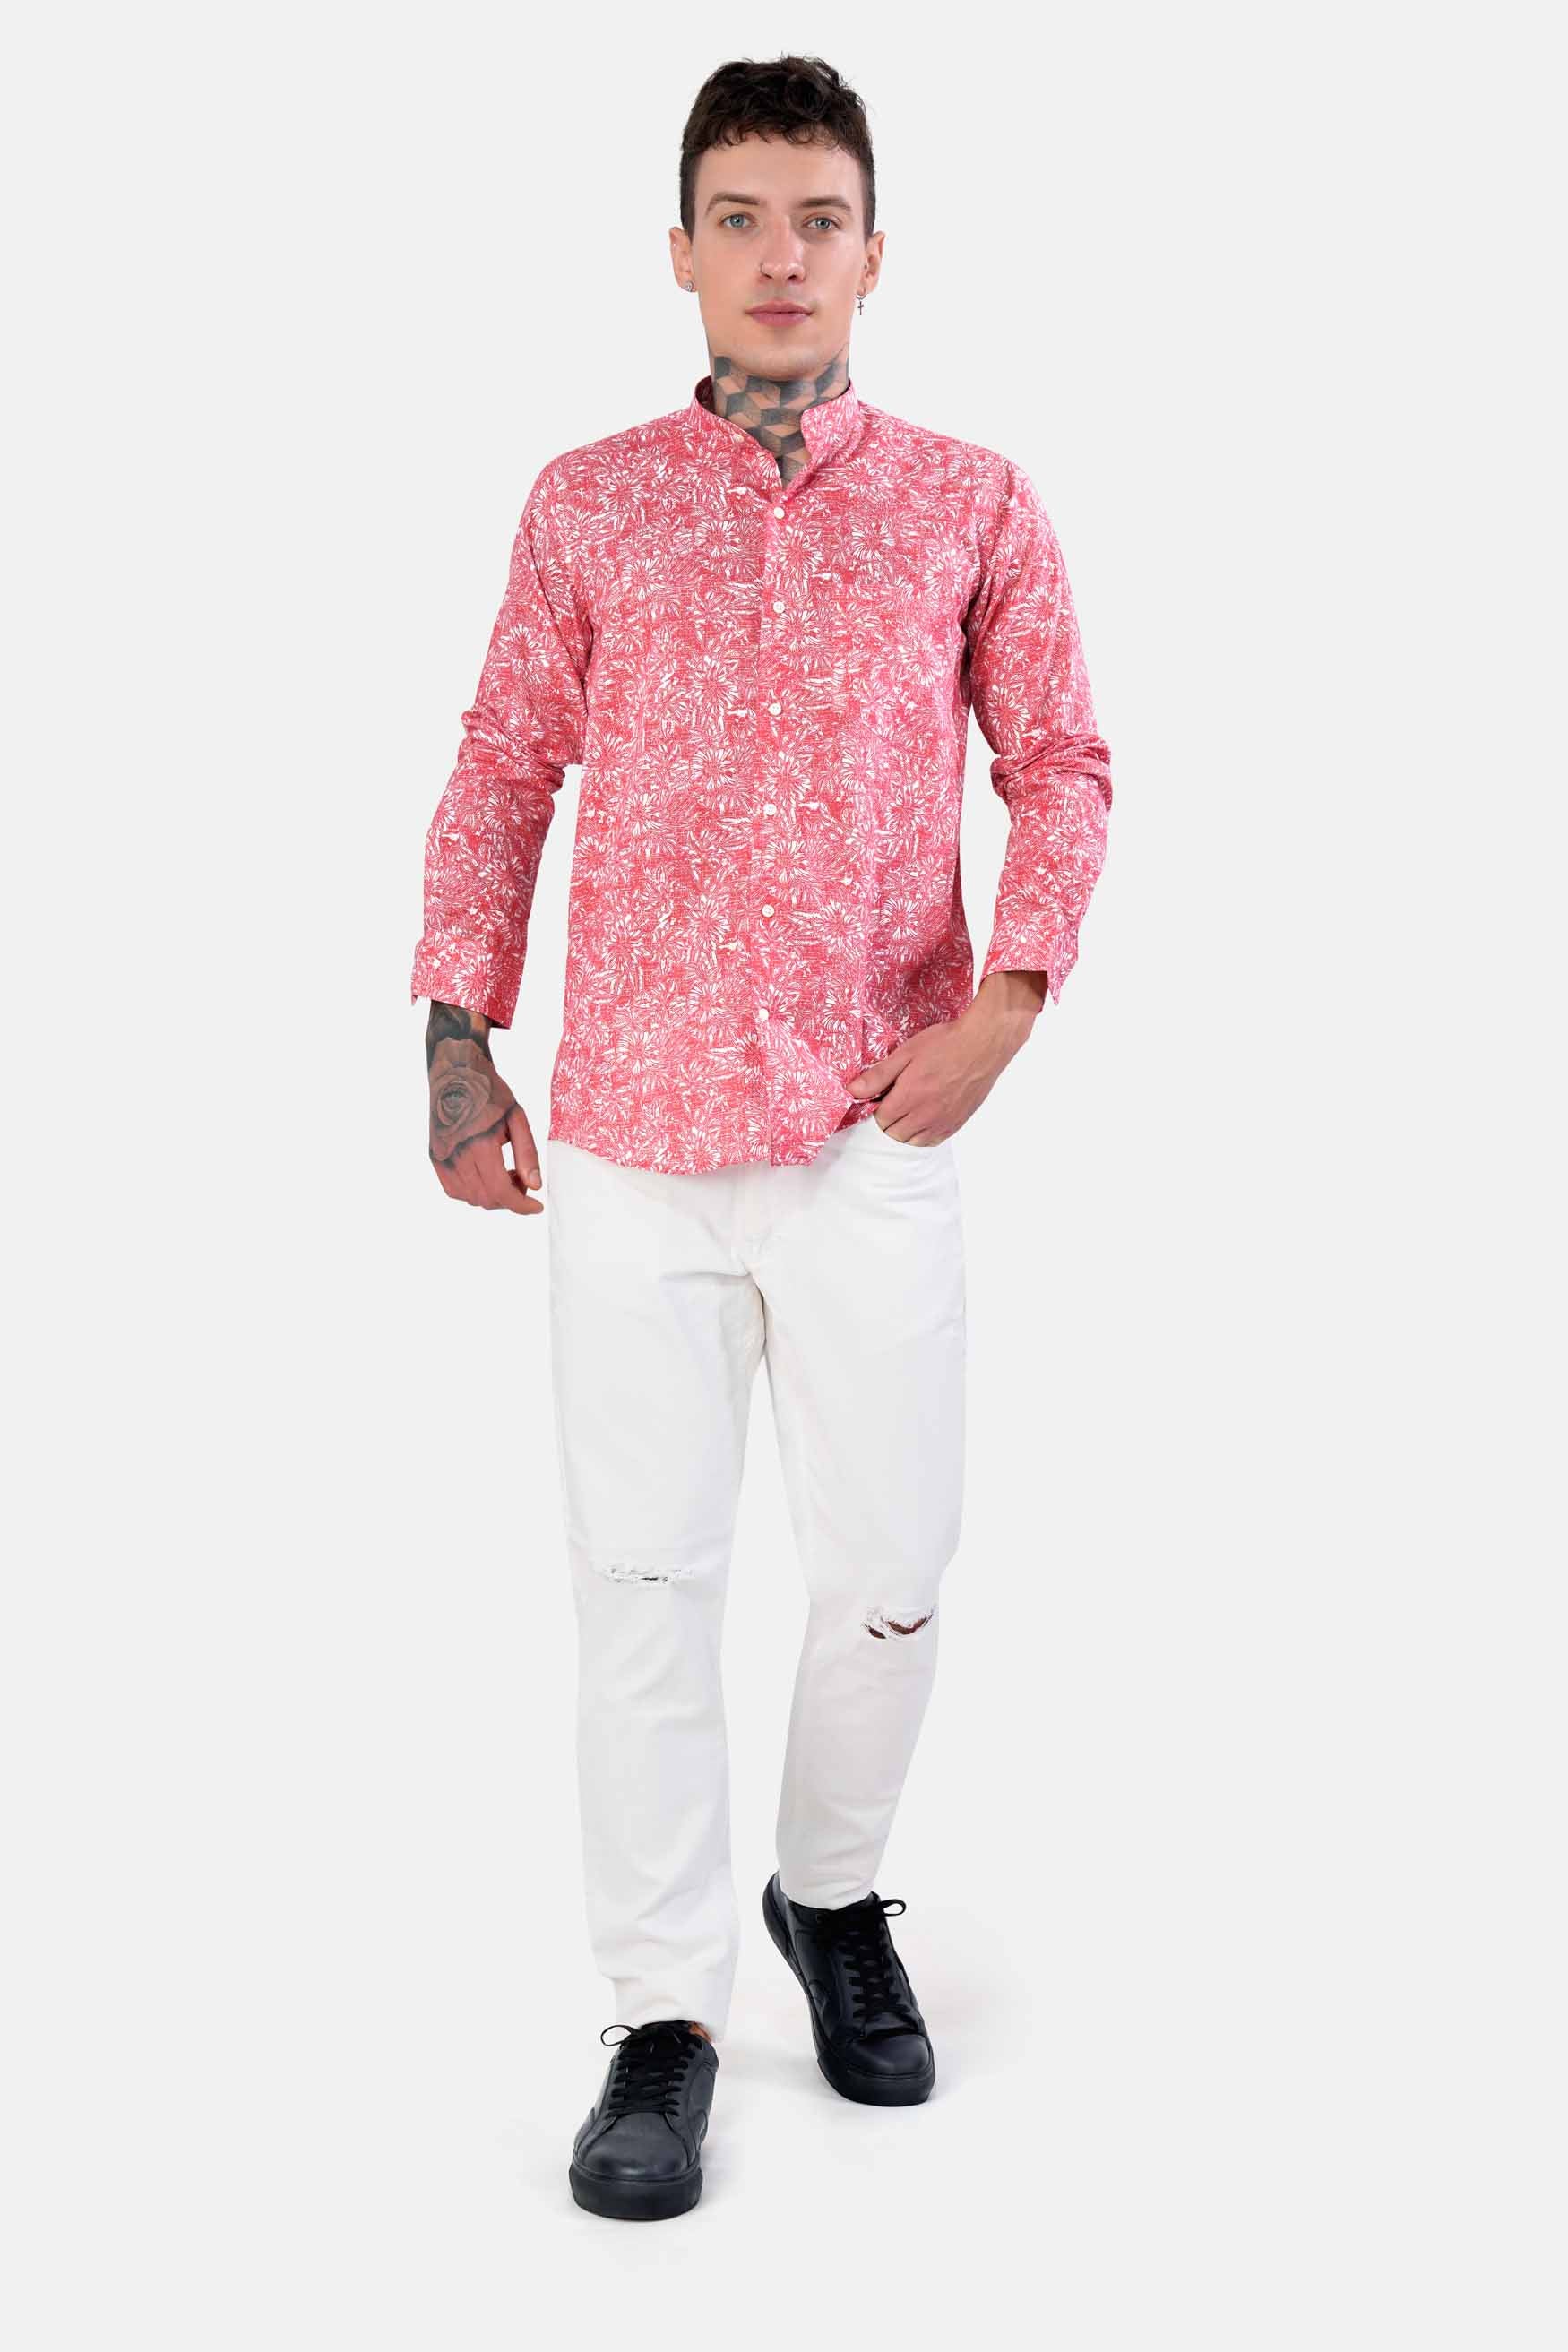 Brink Pink and White Floral Printed Luxurious Linen Shirt